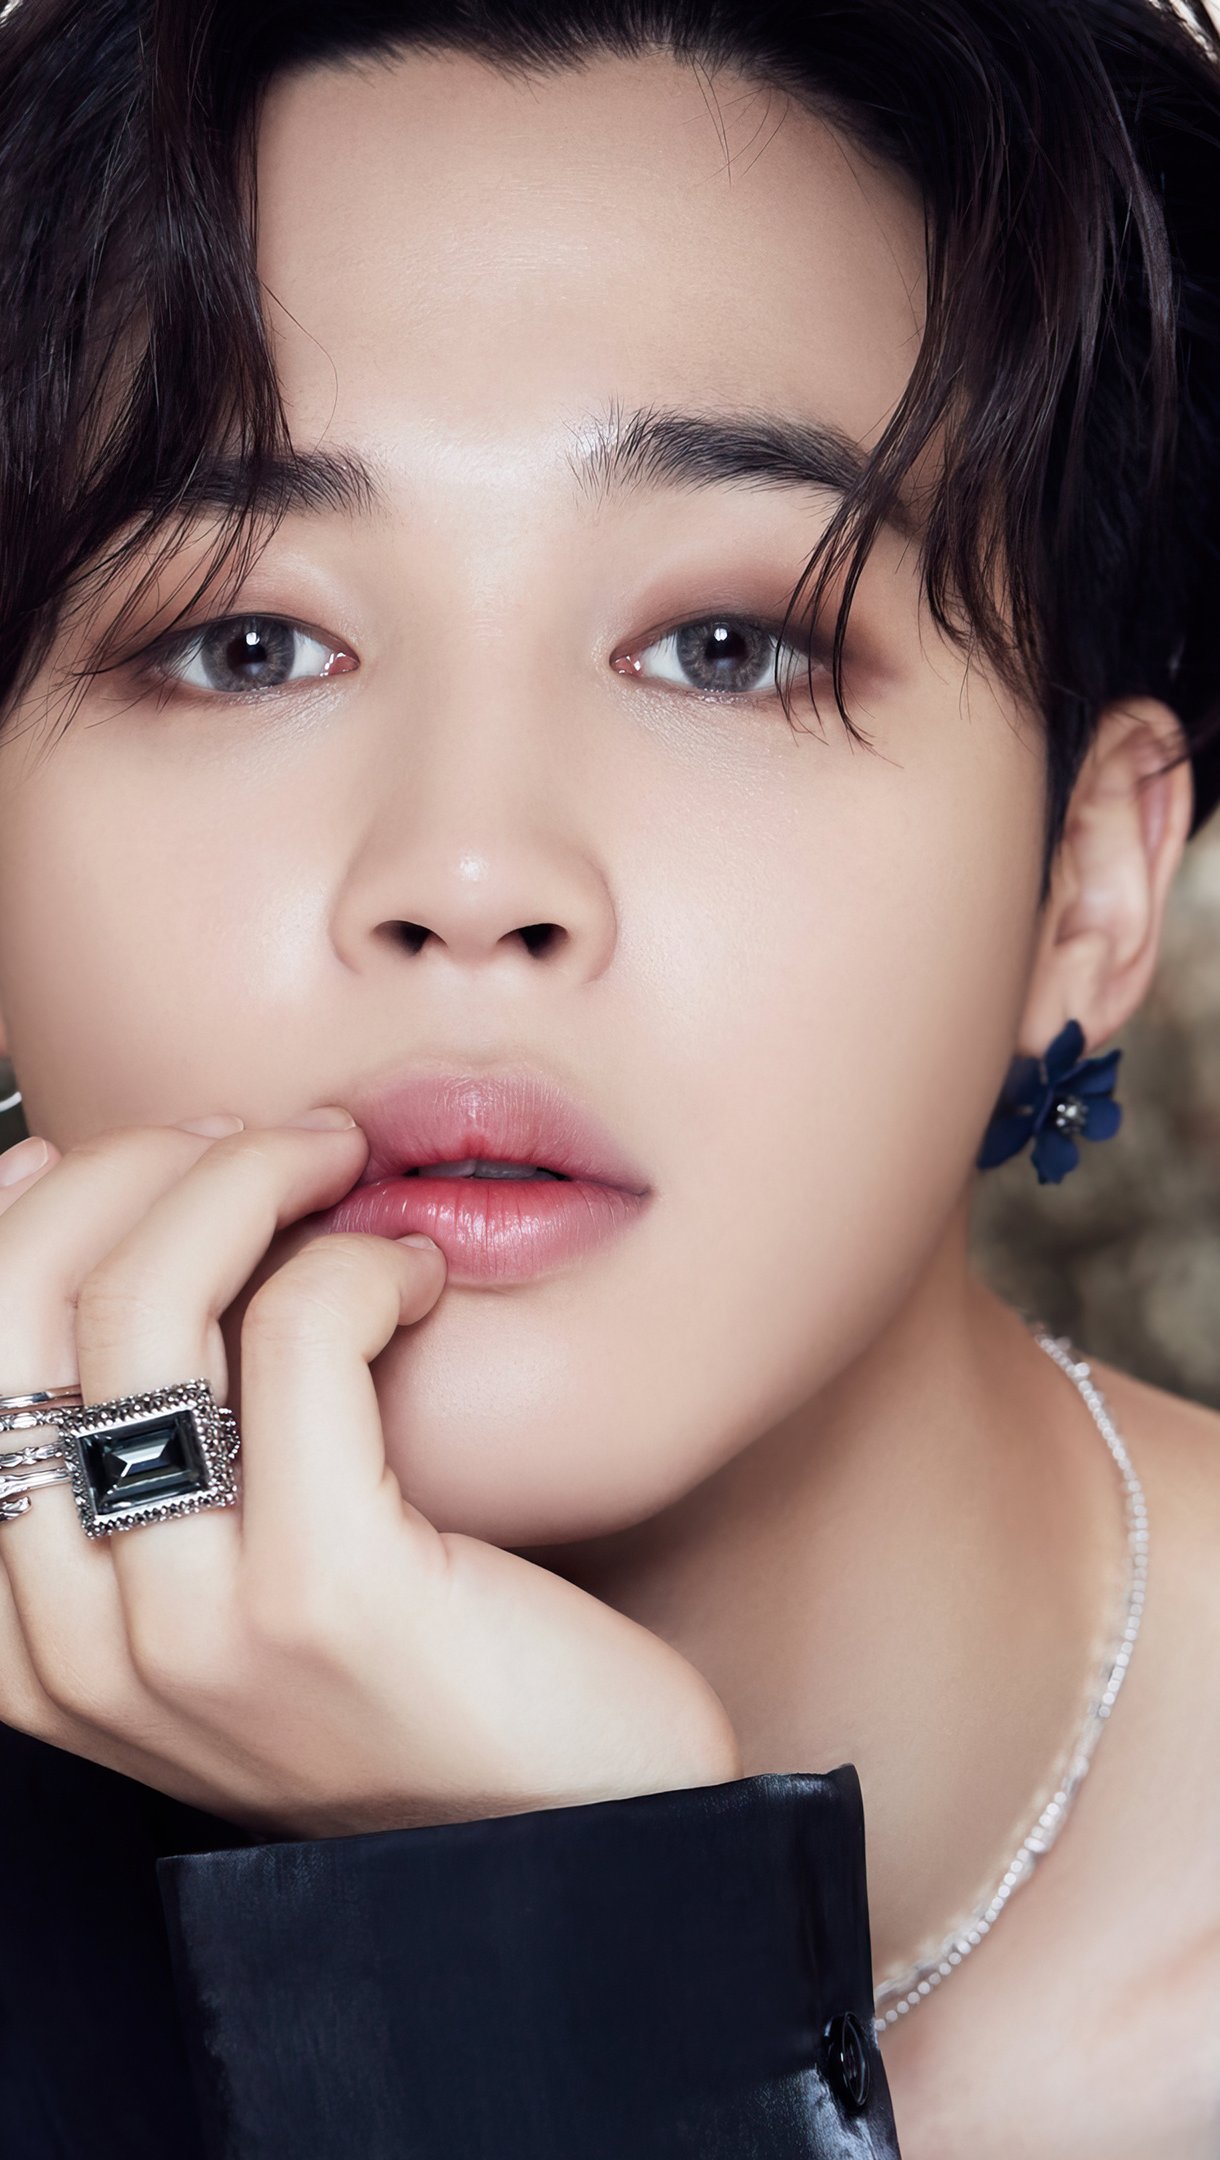 A young man with black hair and rings - Jimin